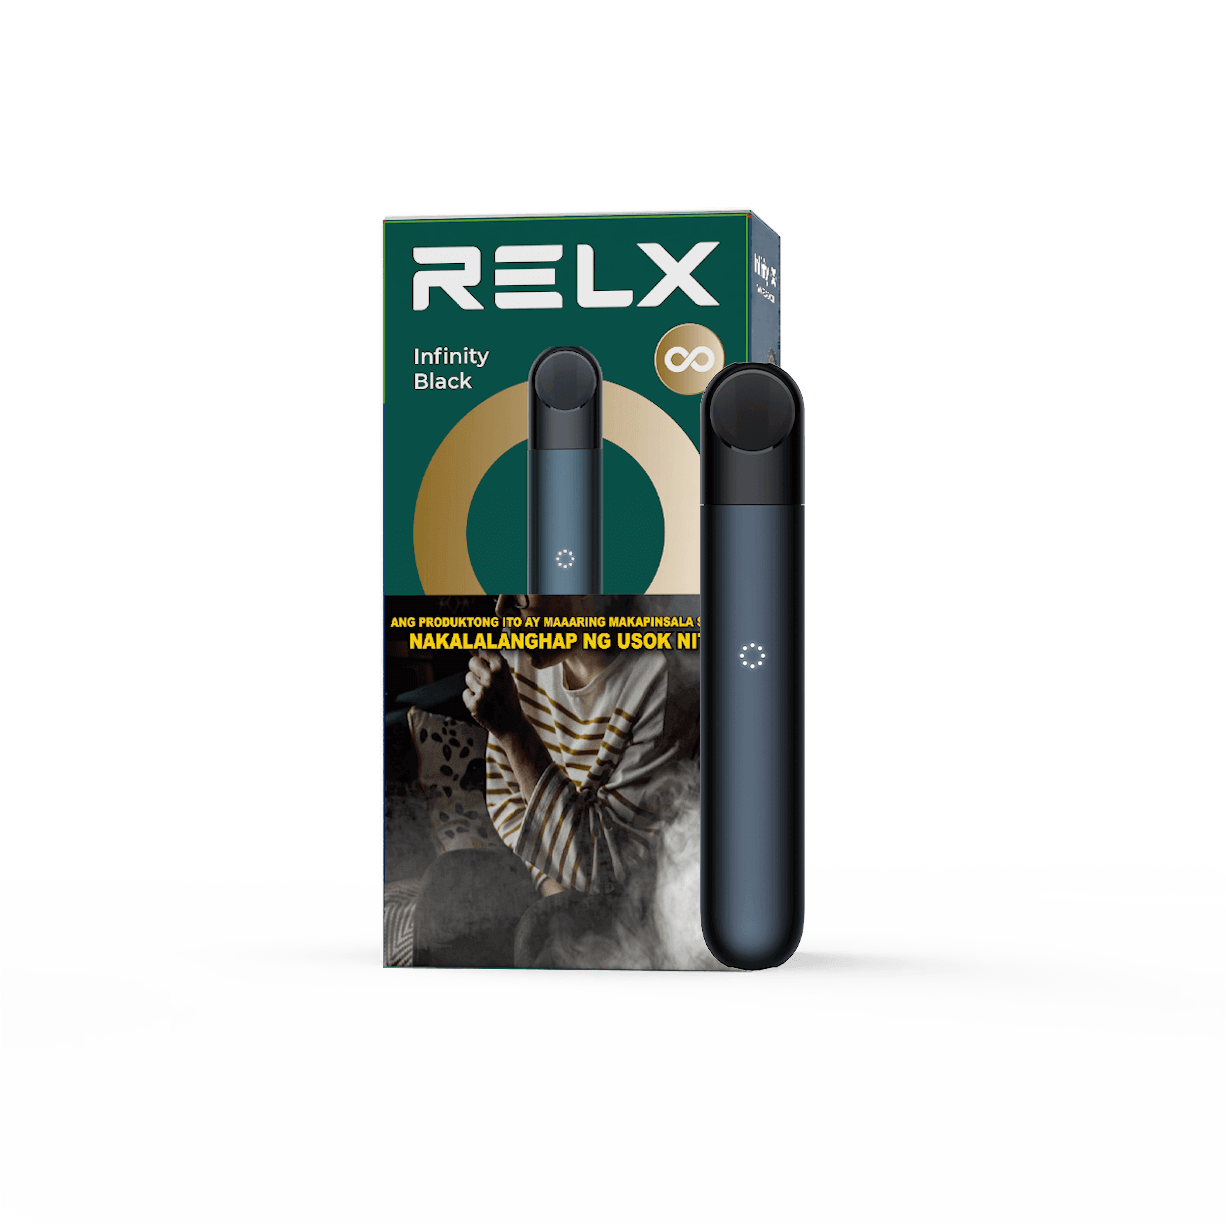 Relx Infinity Device - Black at ₱1149.00